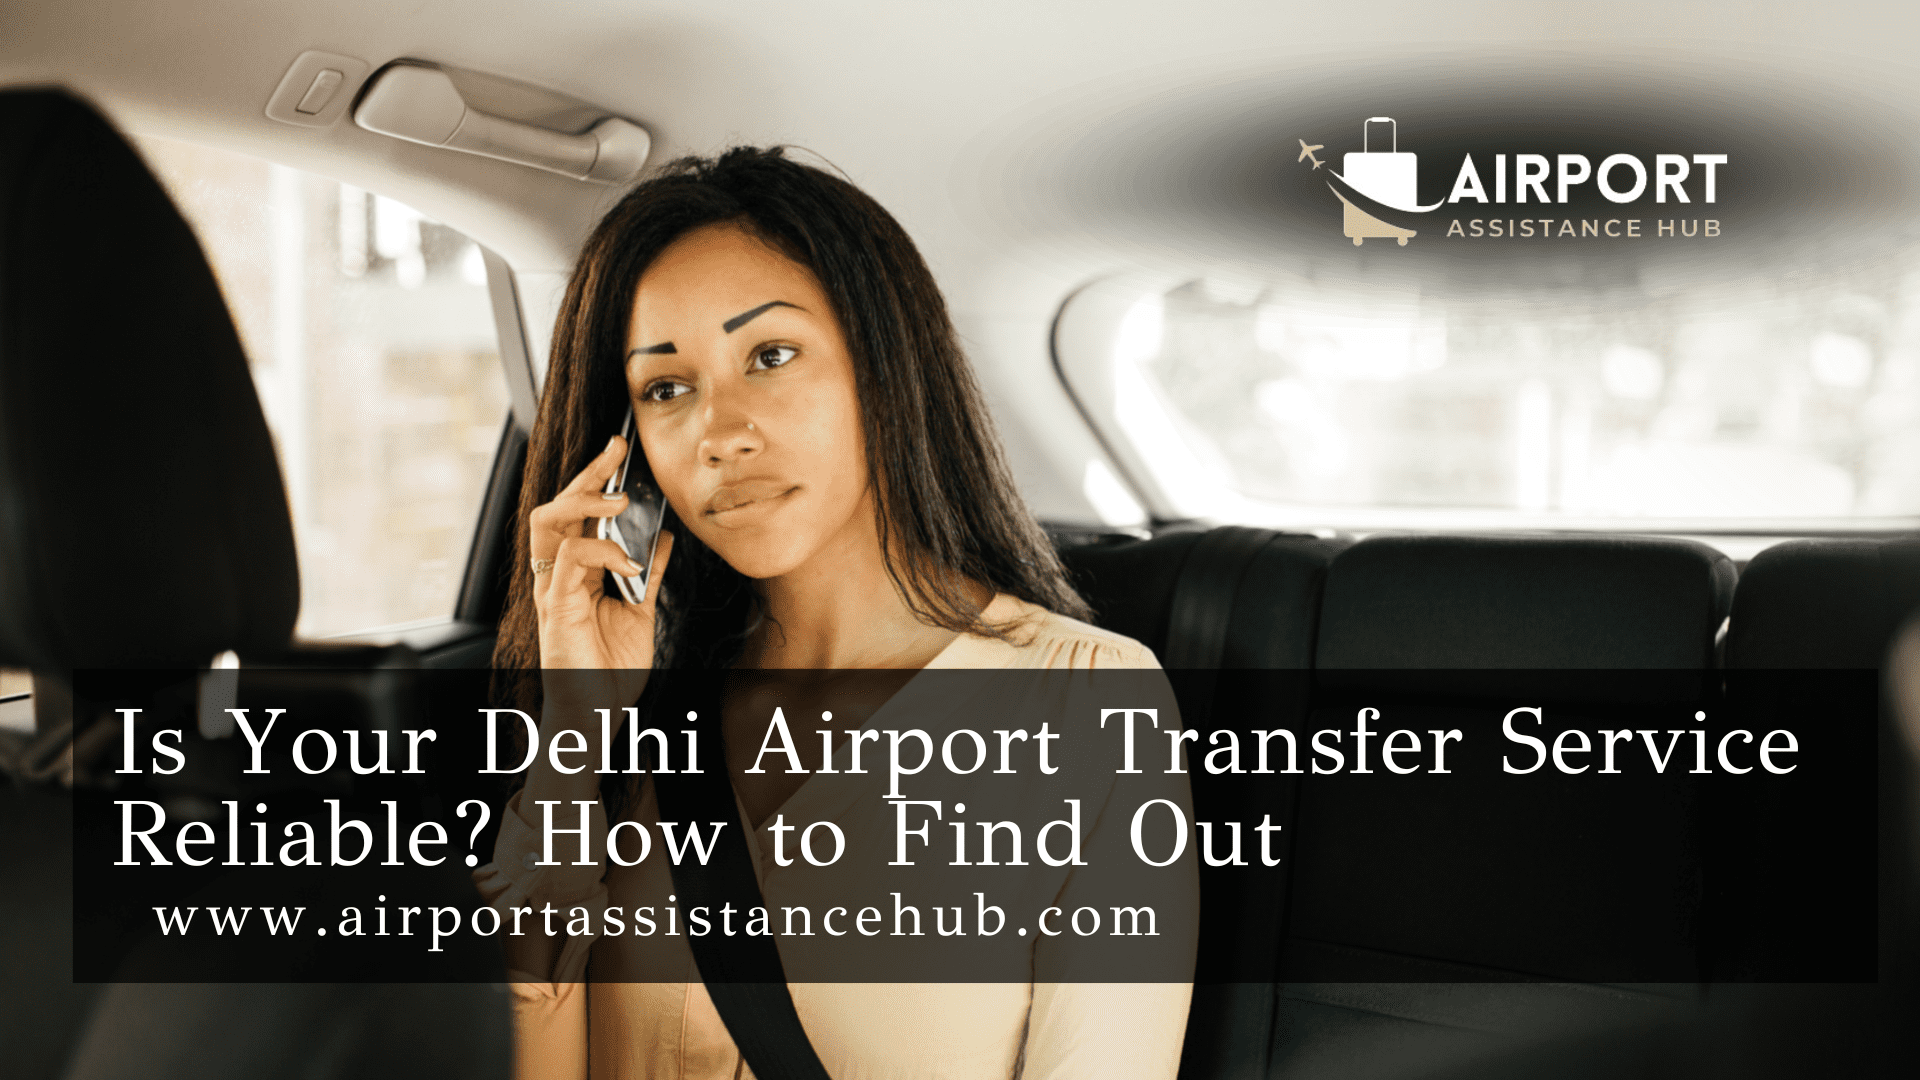 Is Your Delhi Airport Transfer Service Reliable? How to Find Out